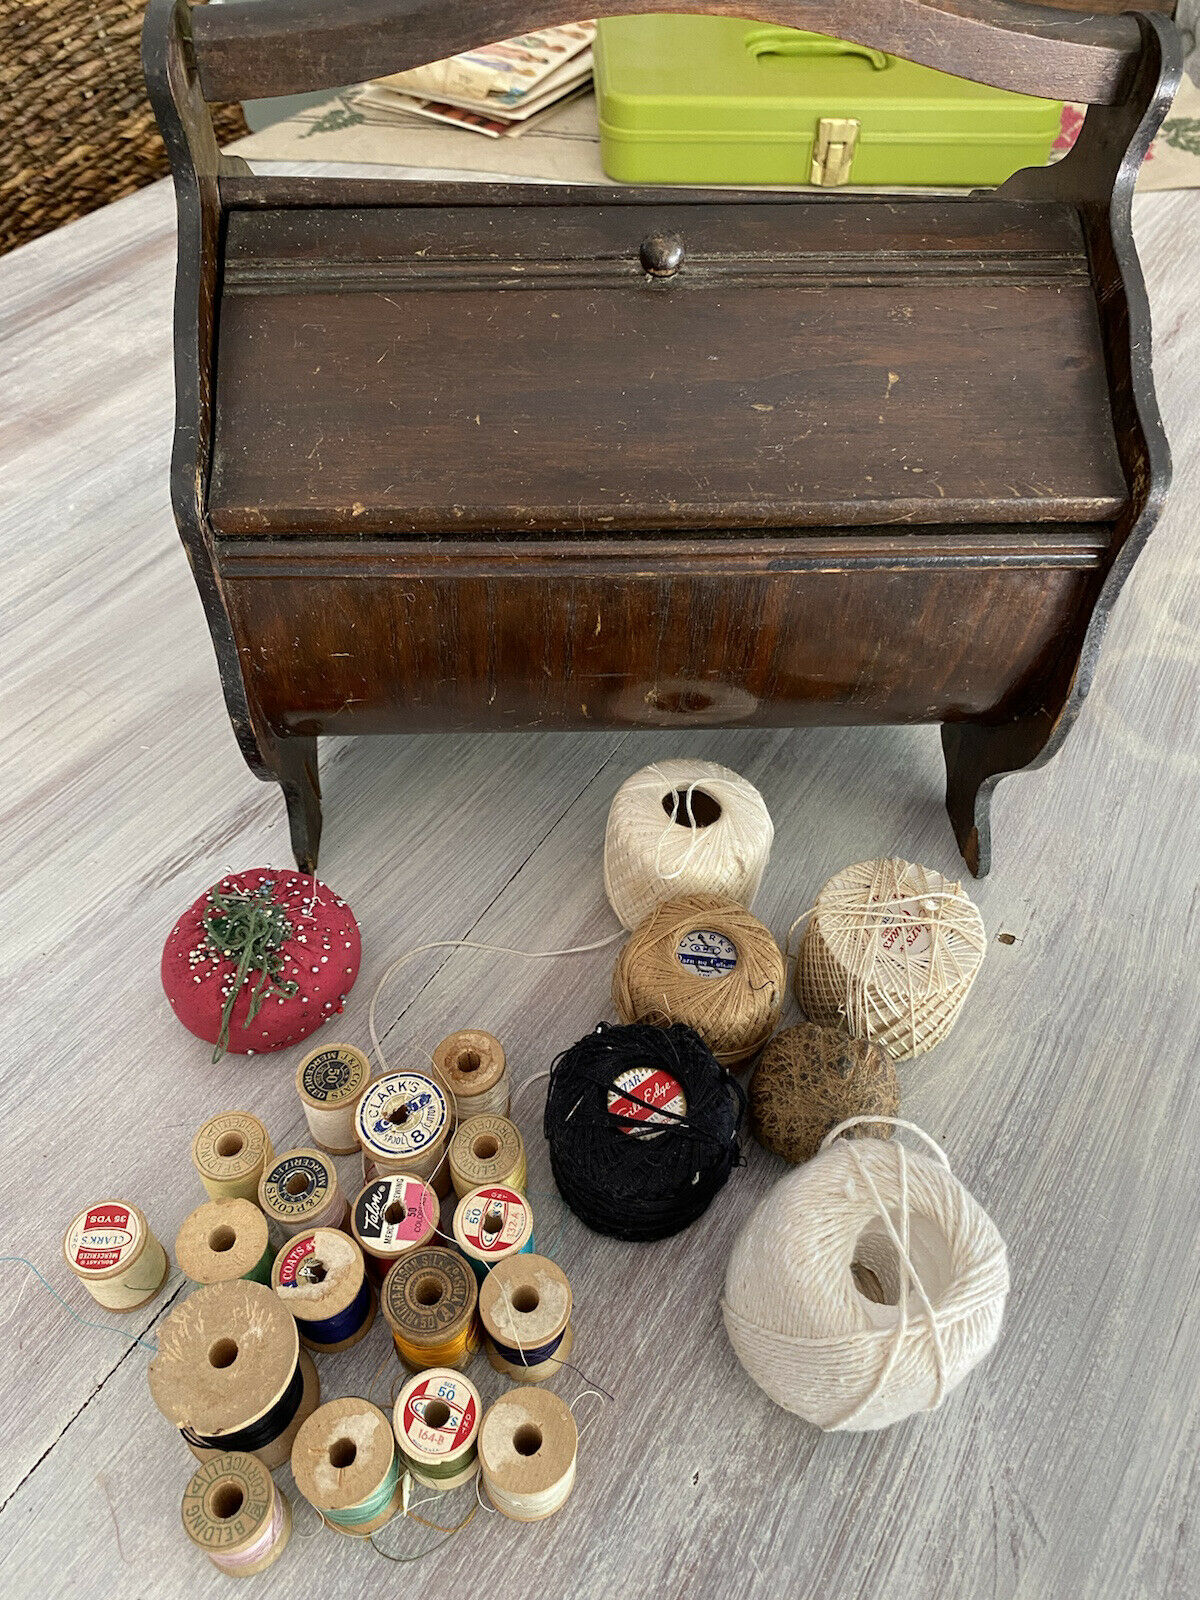 Antique Sewing Box Wooden Stand W/ Contents Spools Crochet Thread More